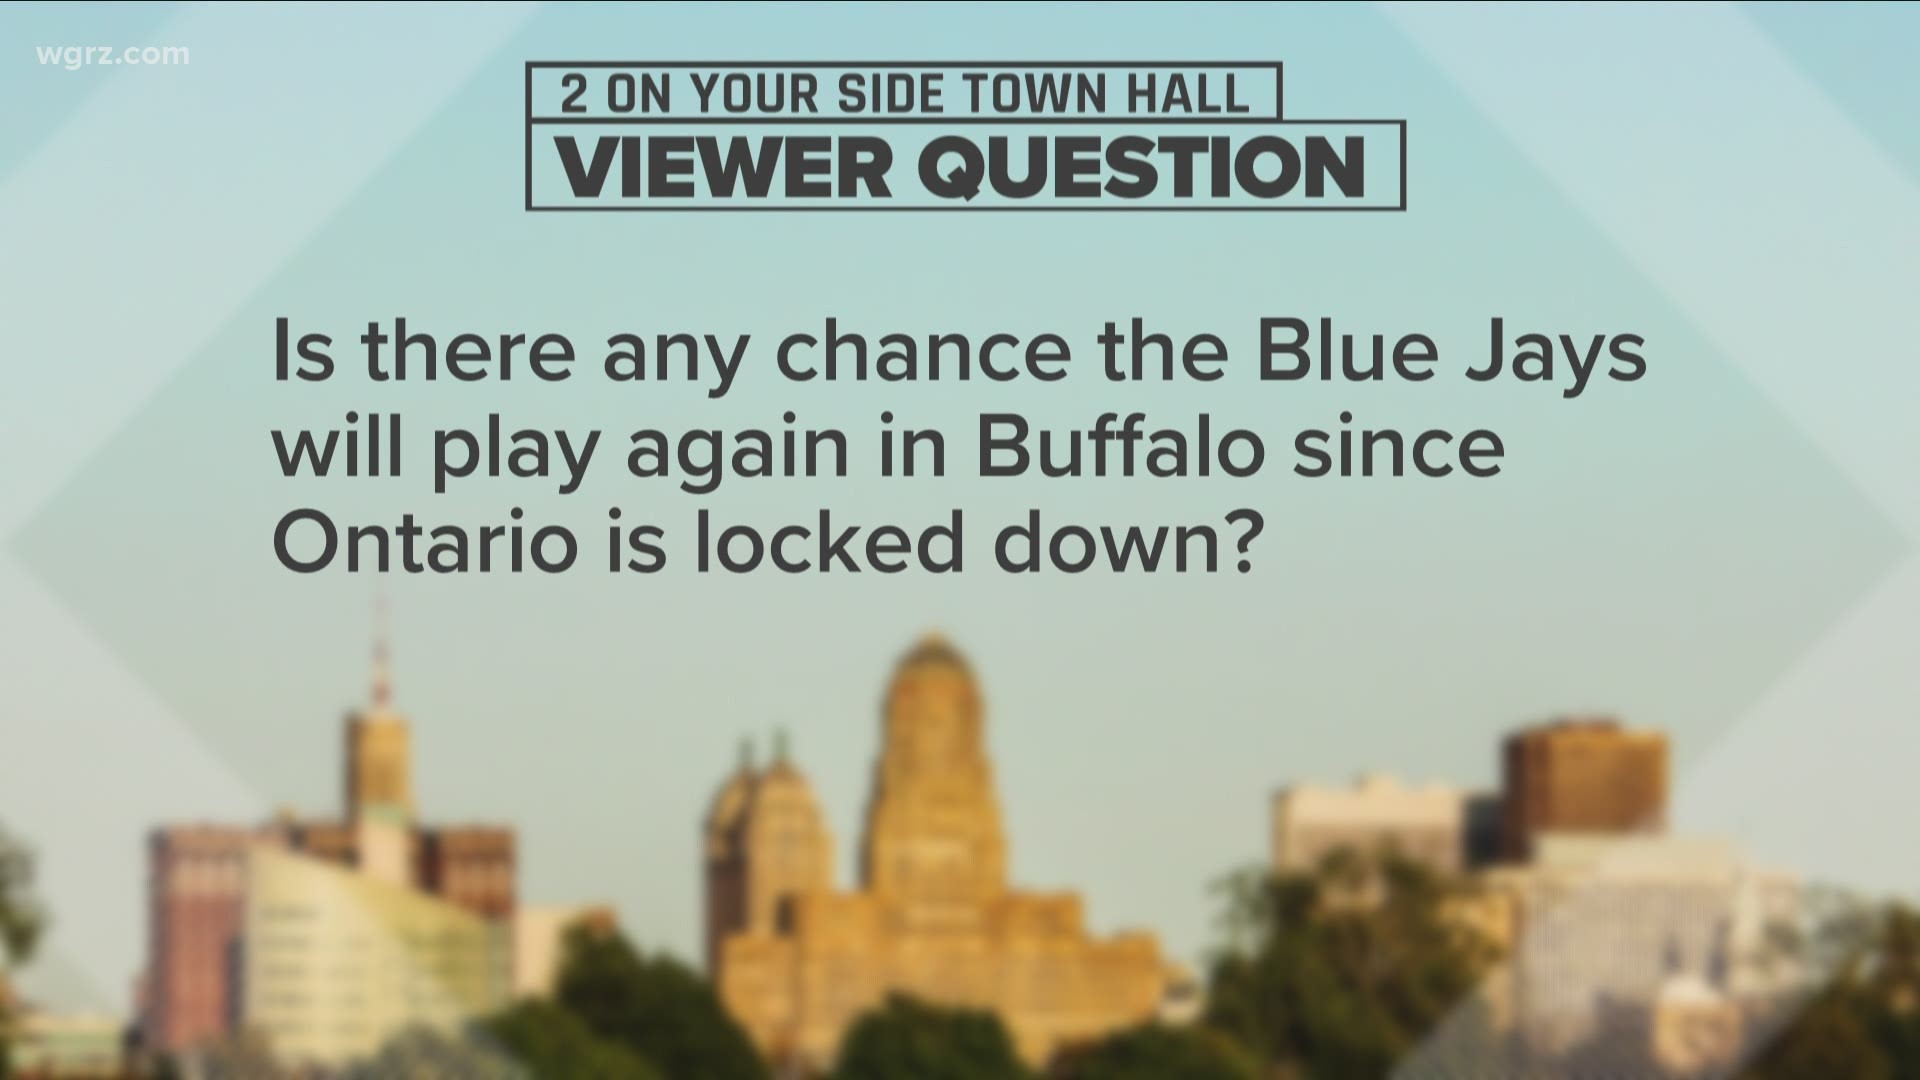 Will the blue jays play in Buffalo this season, we discuss the probability in our town hall